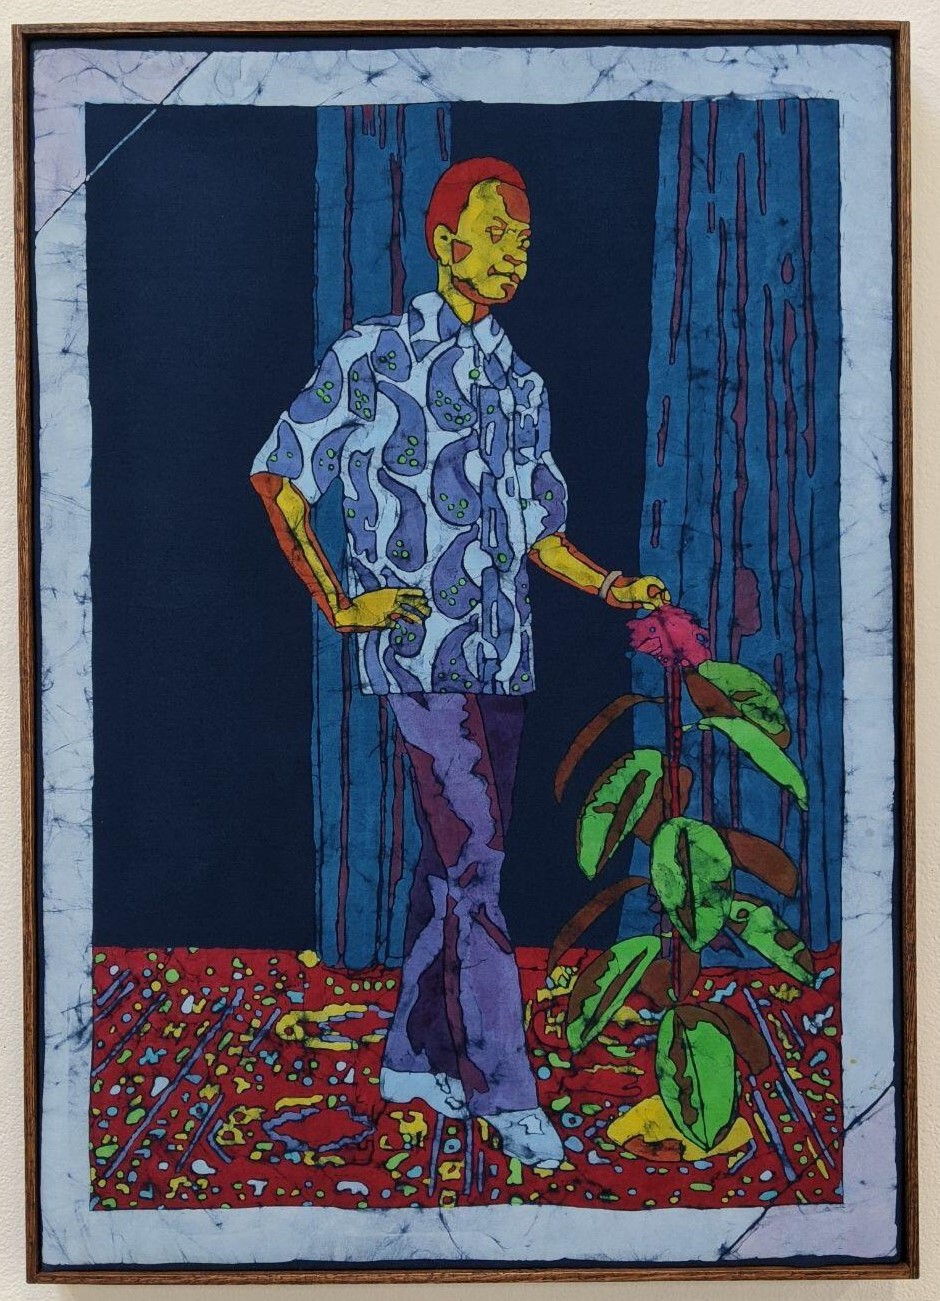 dye on cotton fabric of a person dusting off a plant by Addoley Dzegede